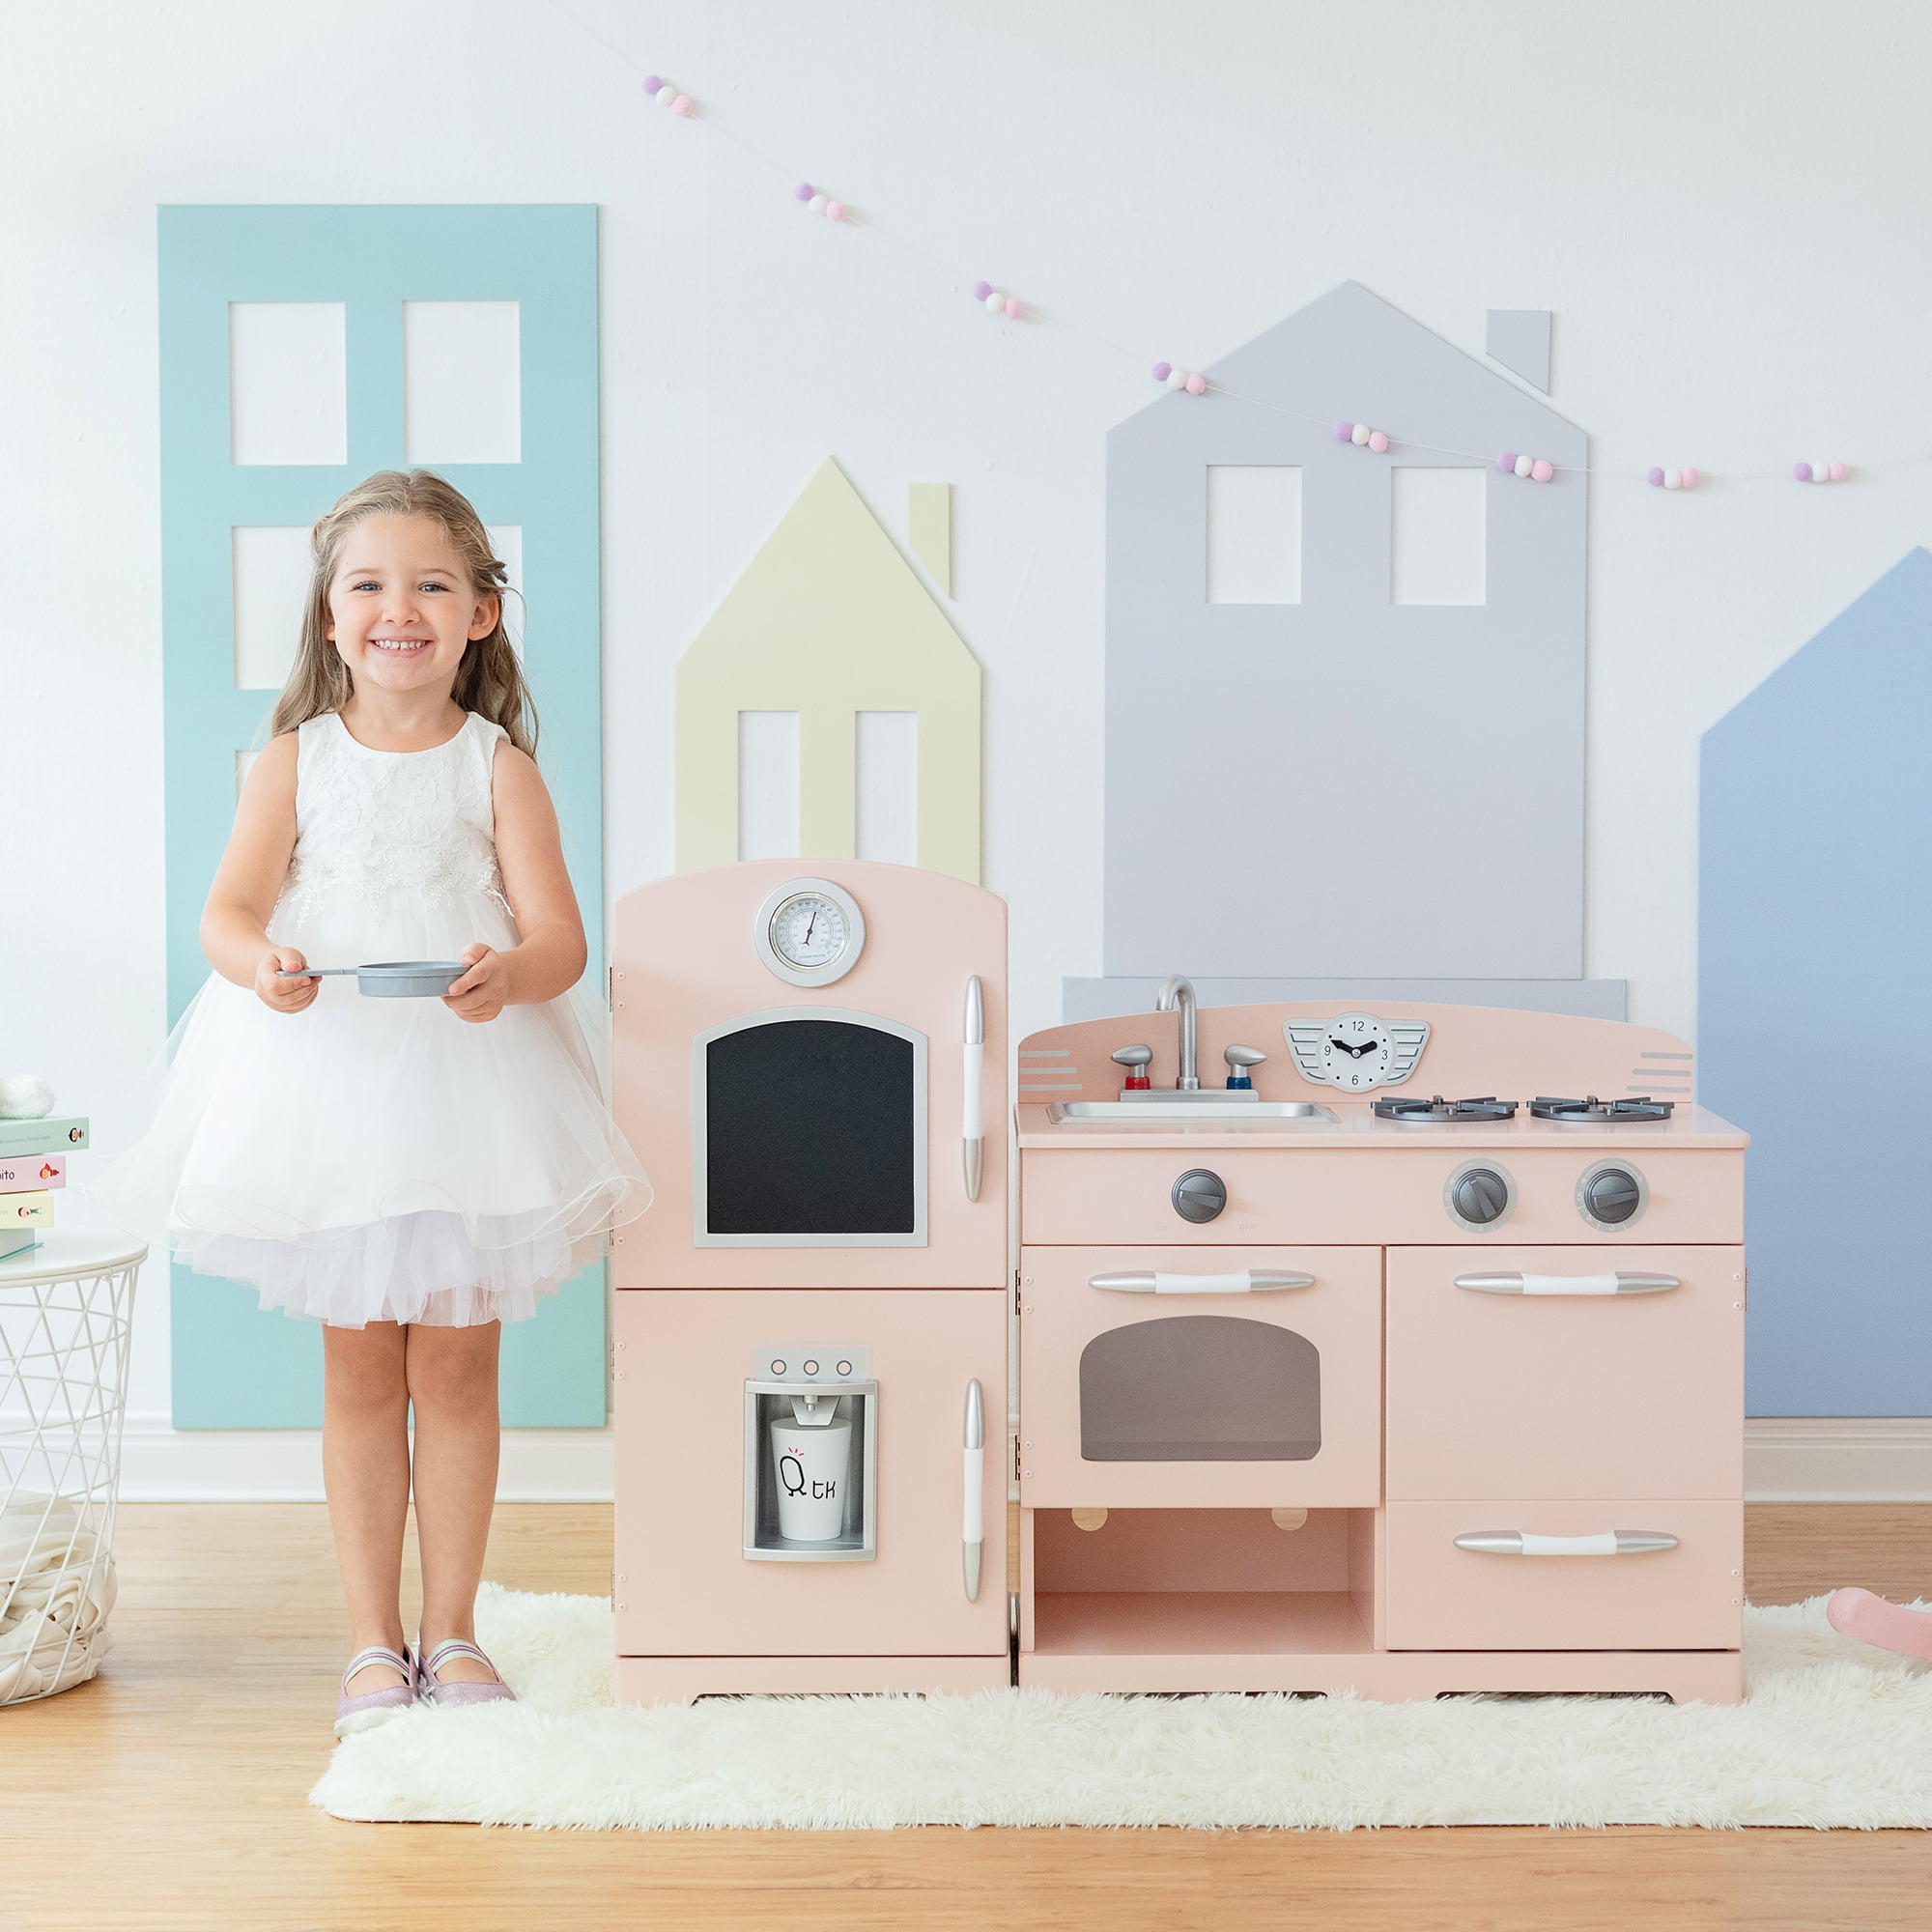 Savvy parents scramble to get their hands on Disney toy kitchens